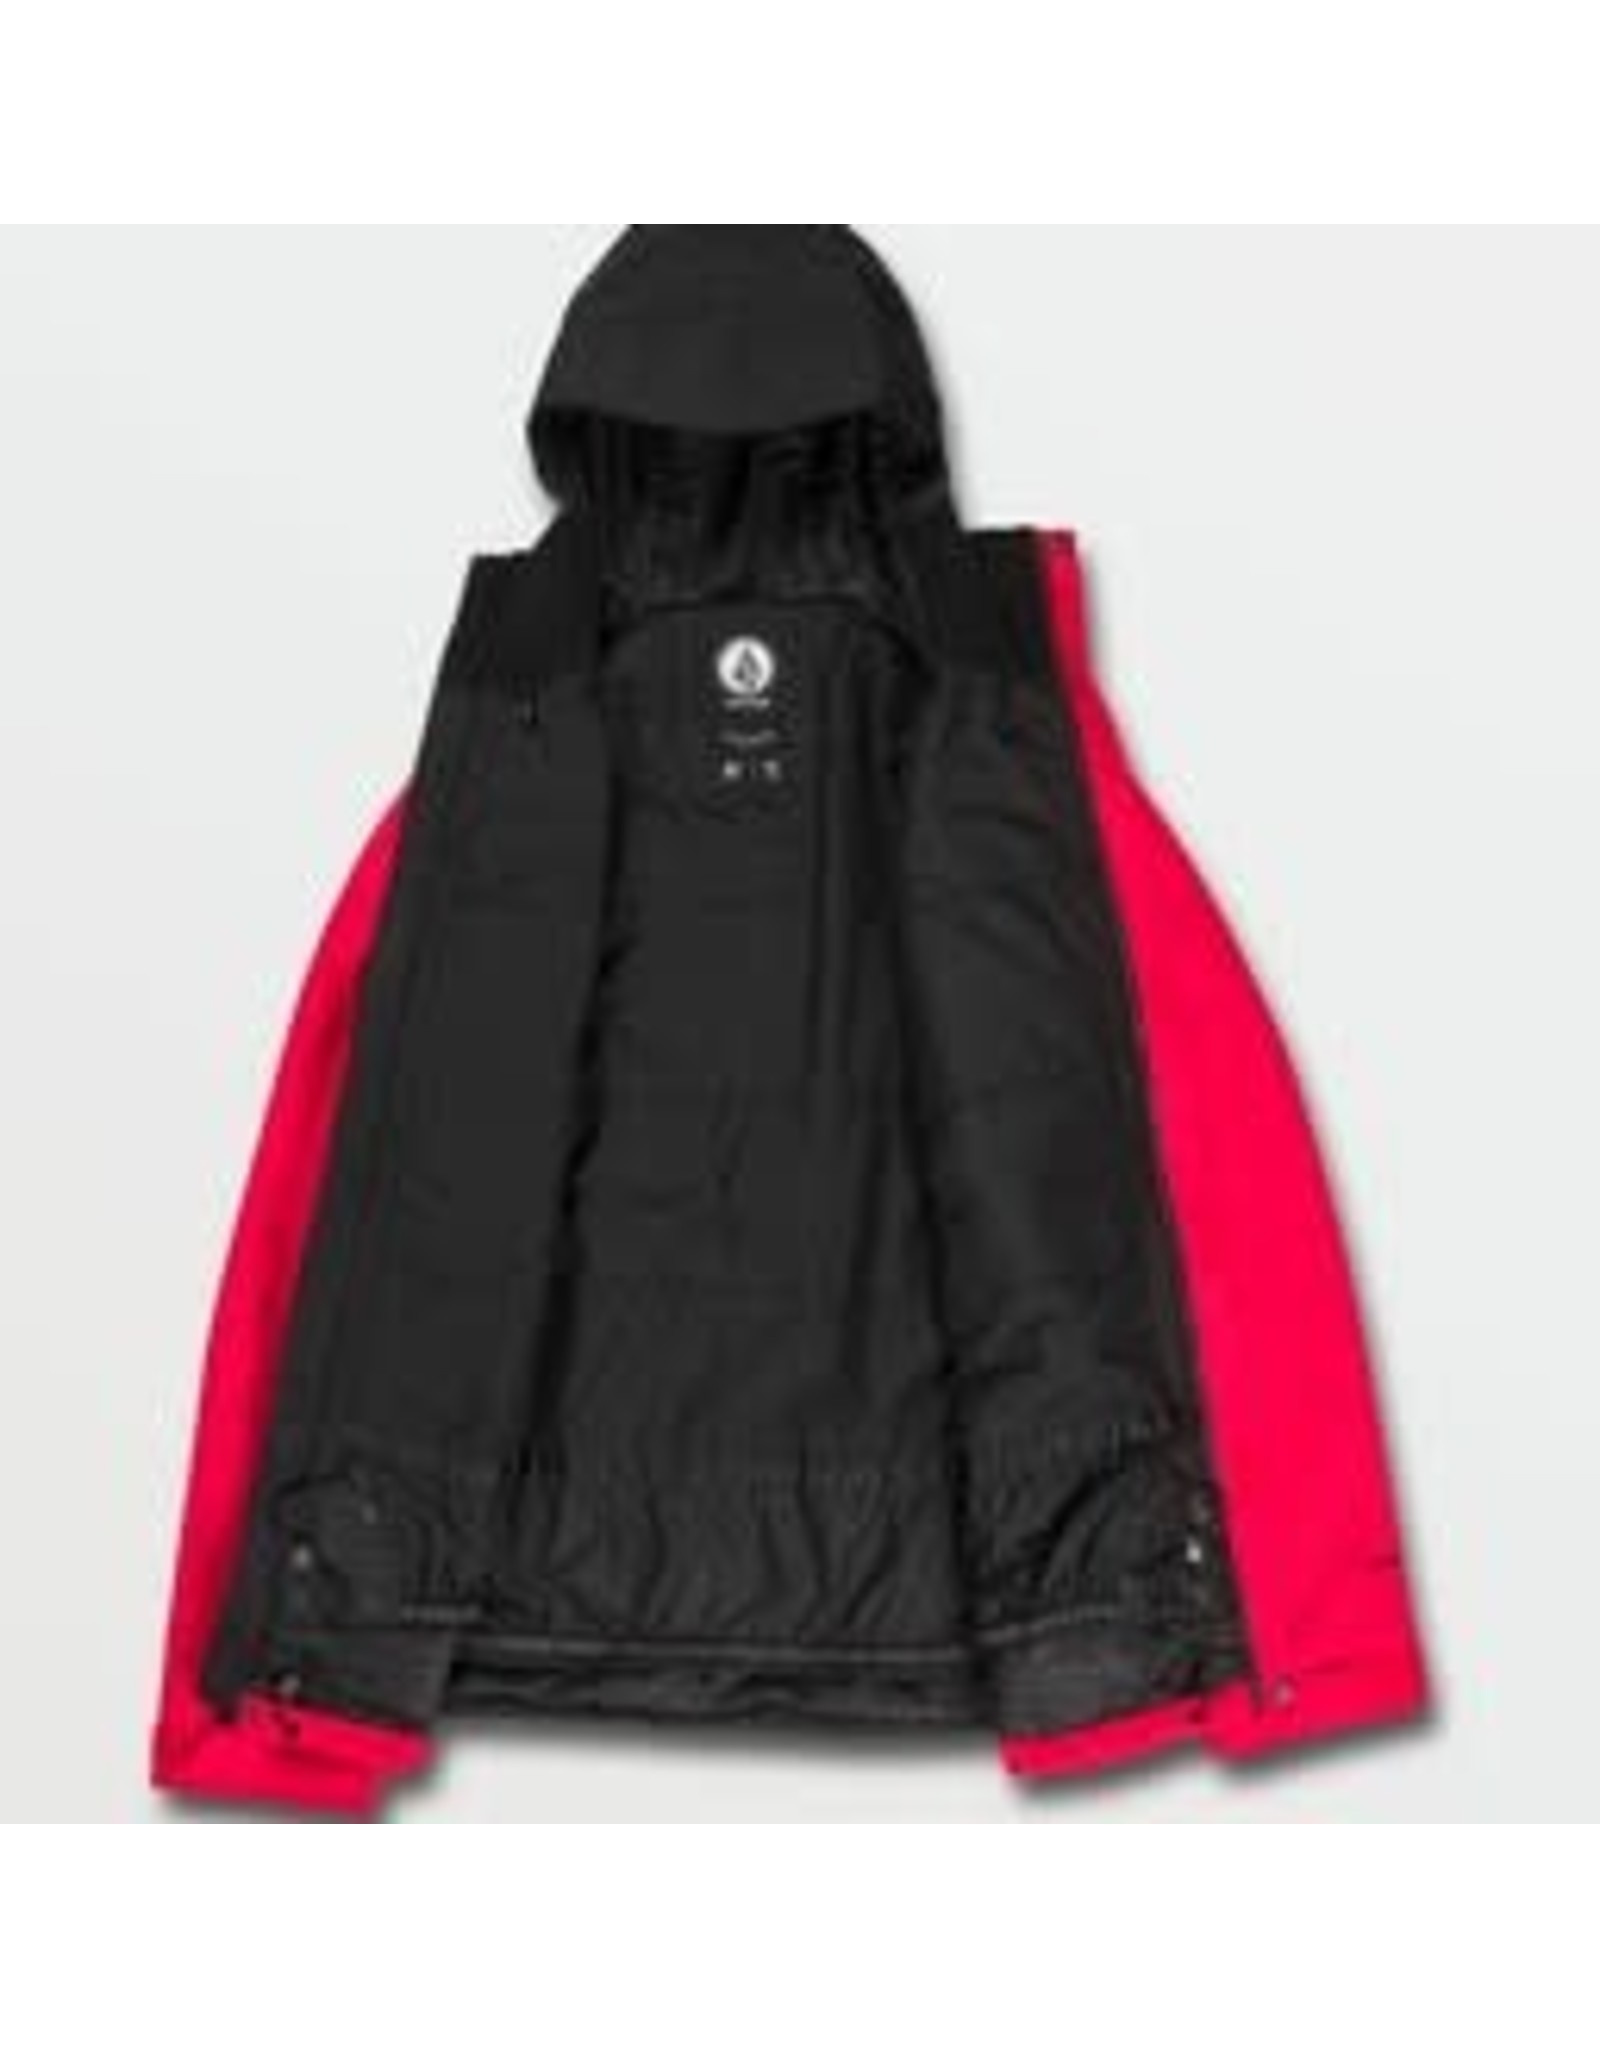 VOLCOM 17Forty Insulated Jacket